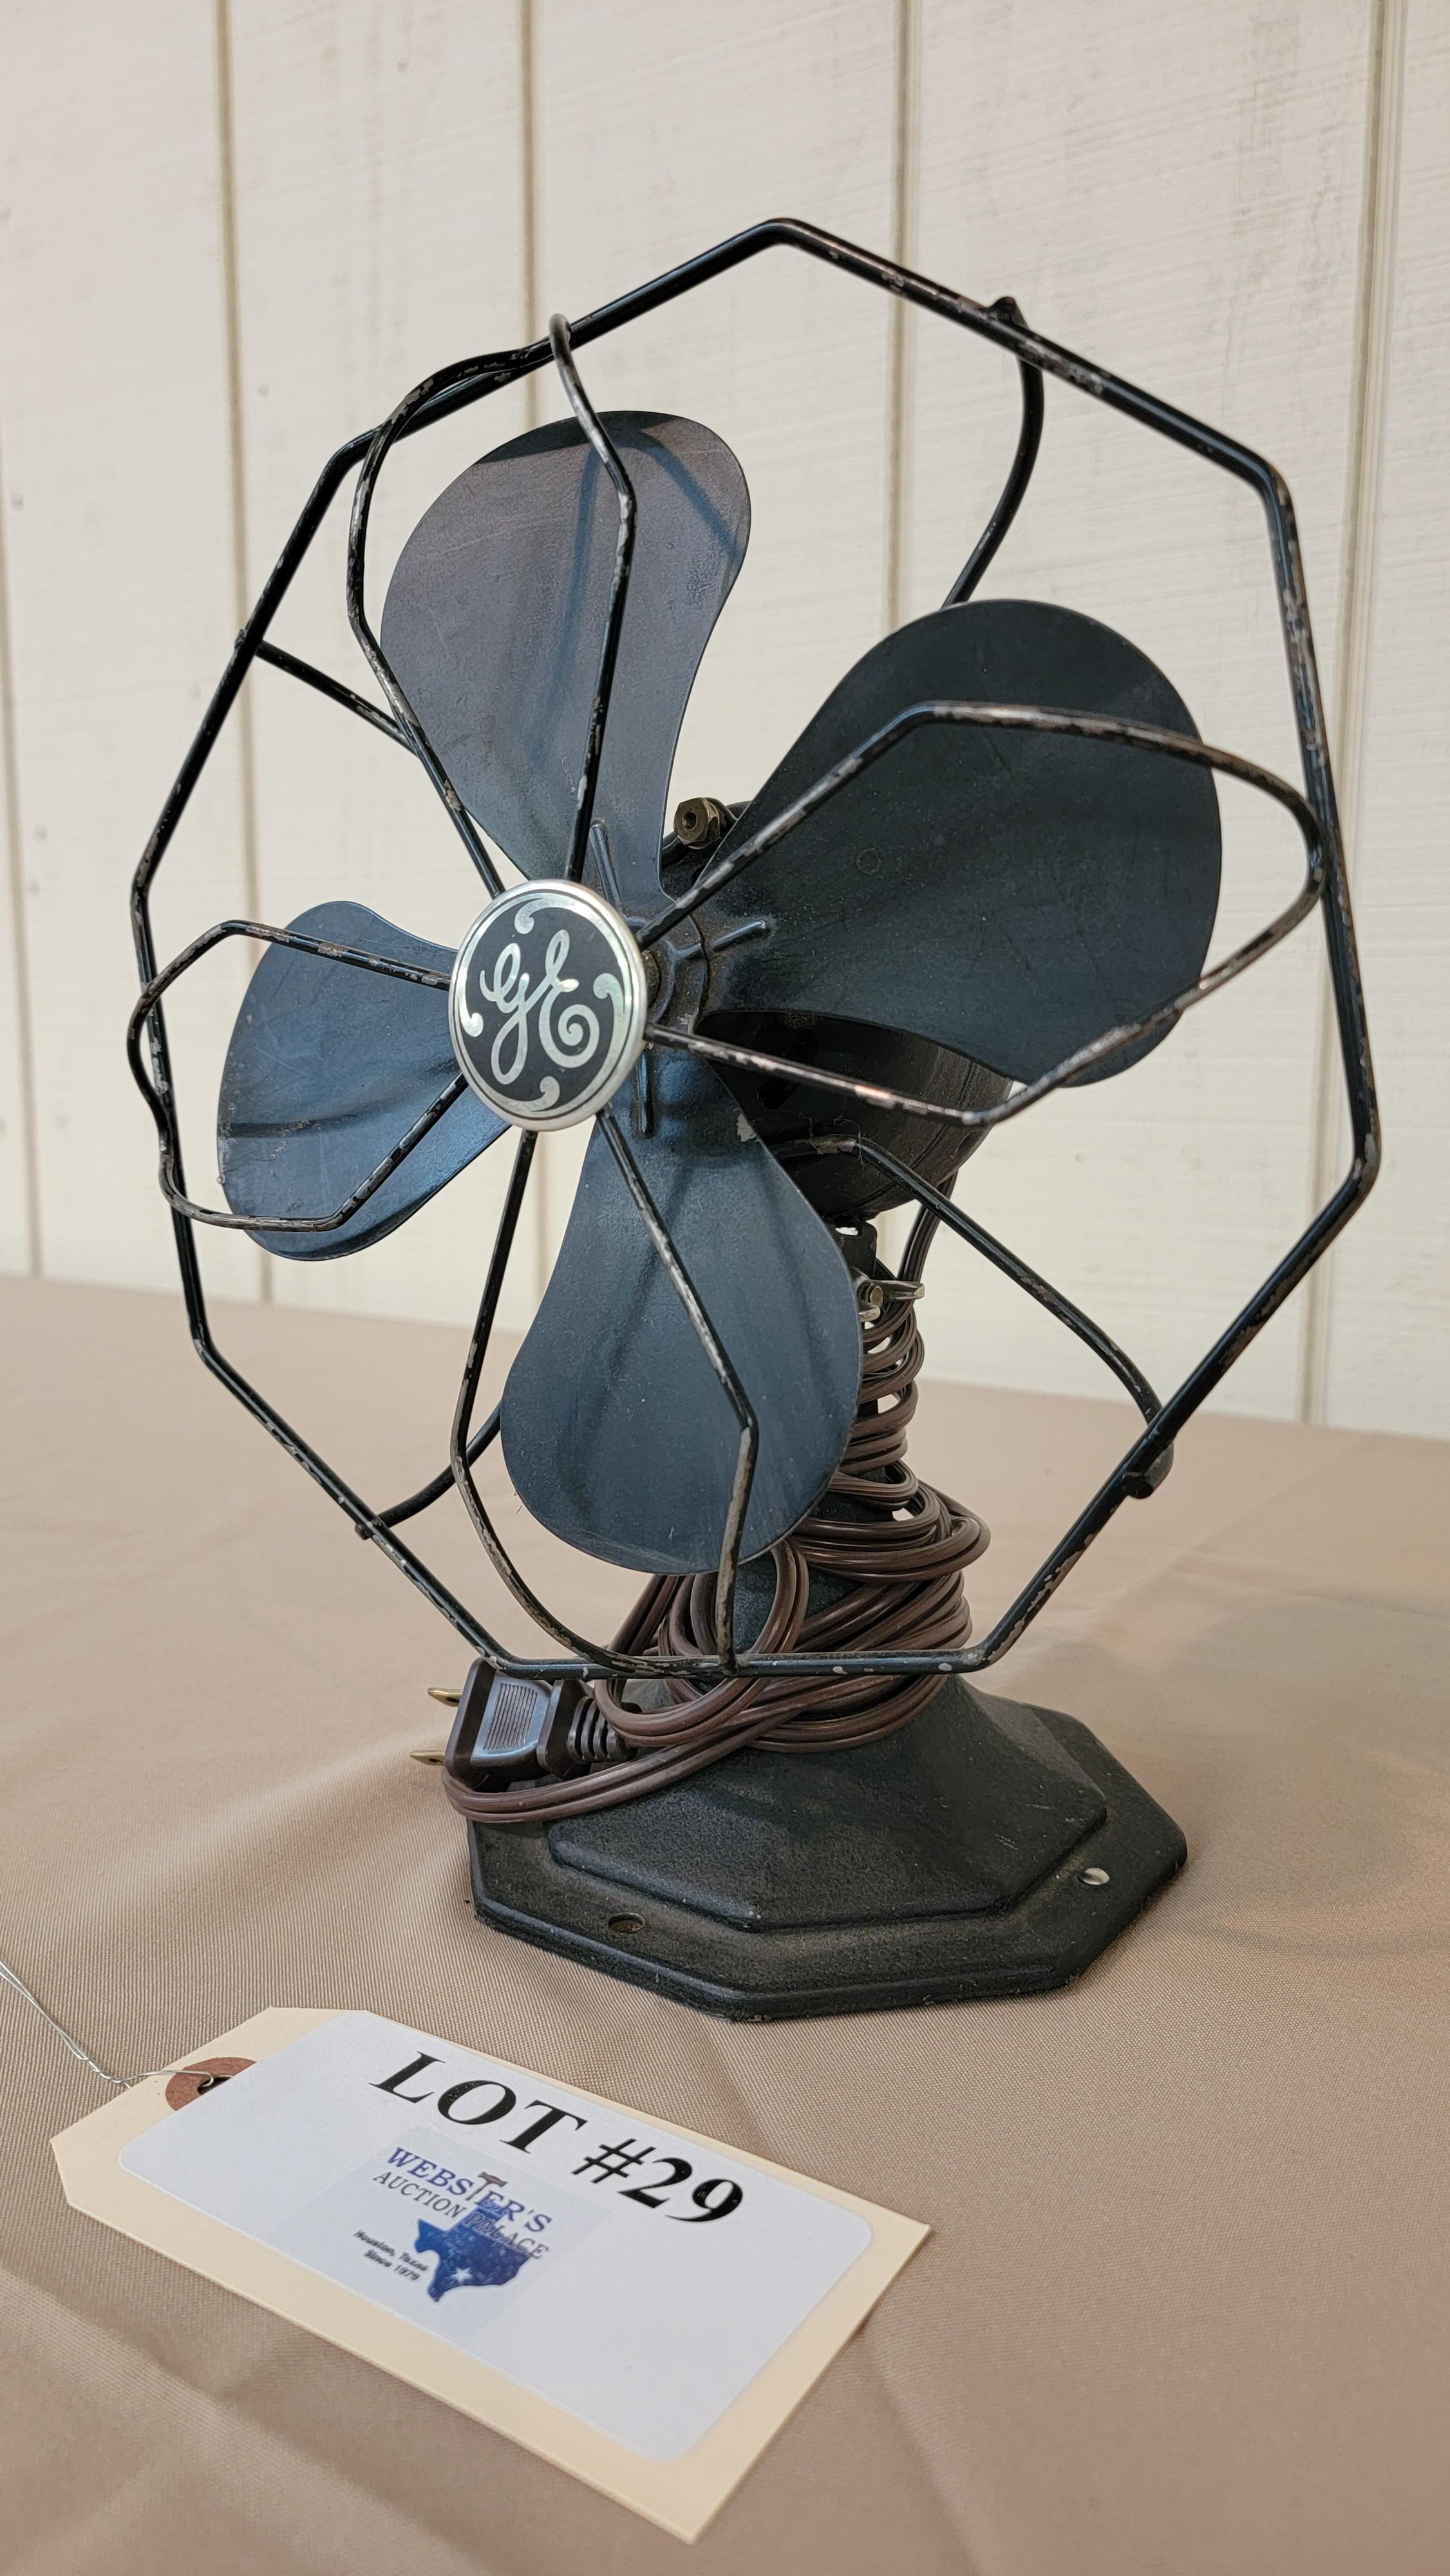 ANTIQUE GE TABLE TOP FAN IN WORKING CONDITION